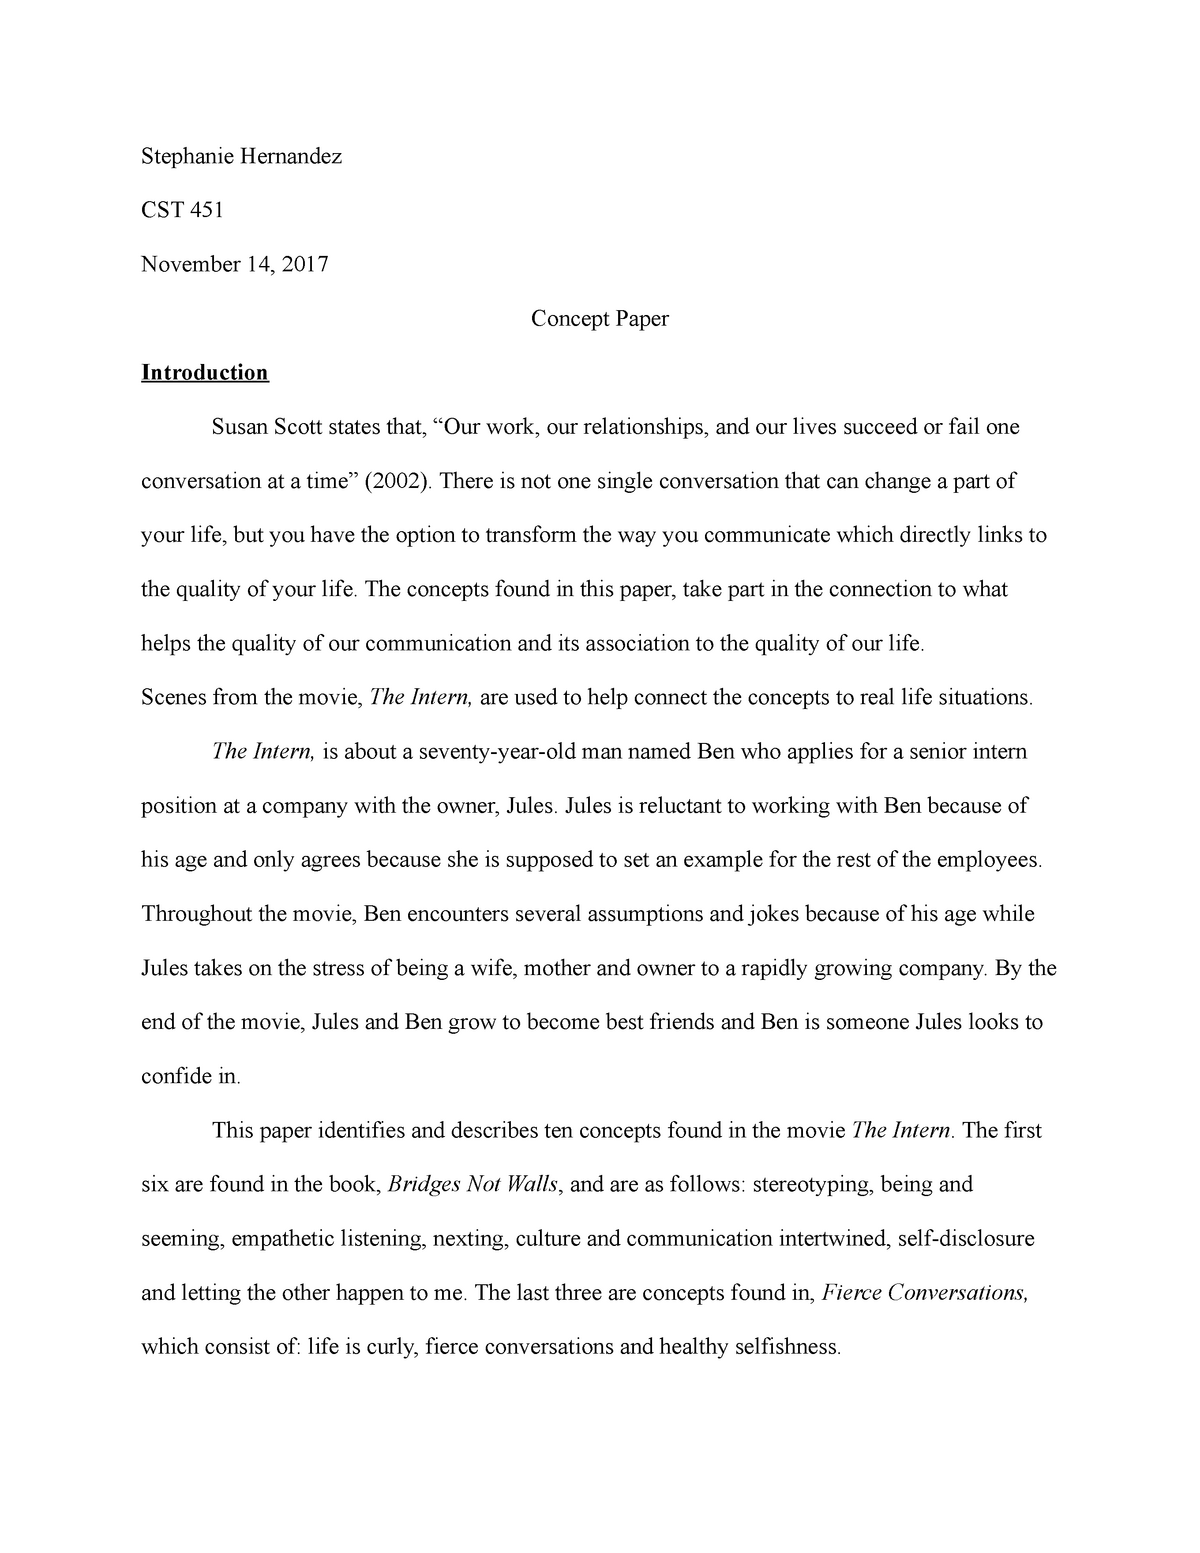 example of a concept paper for research